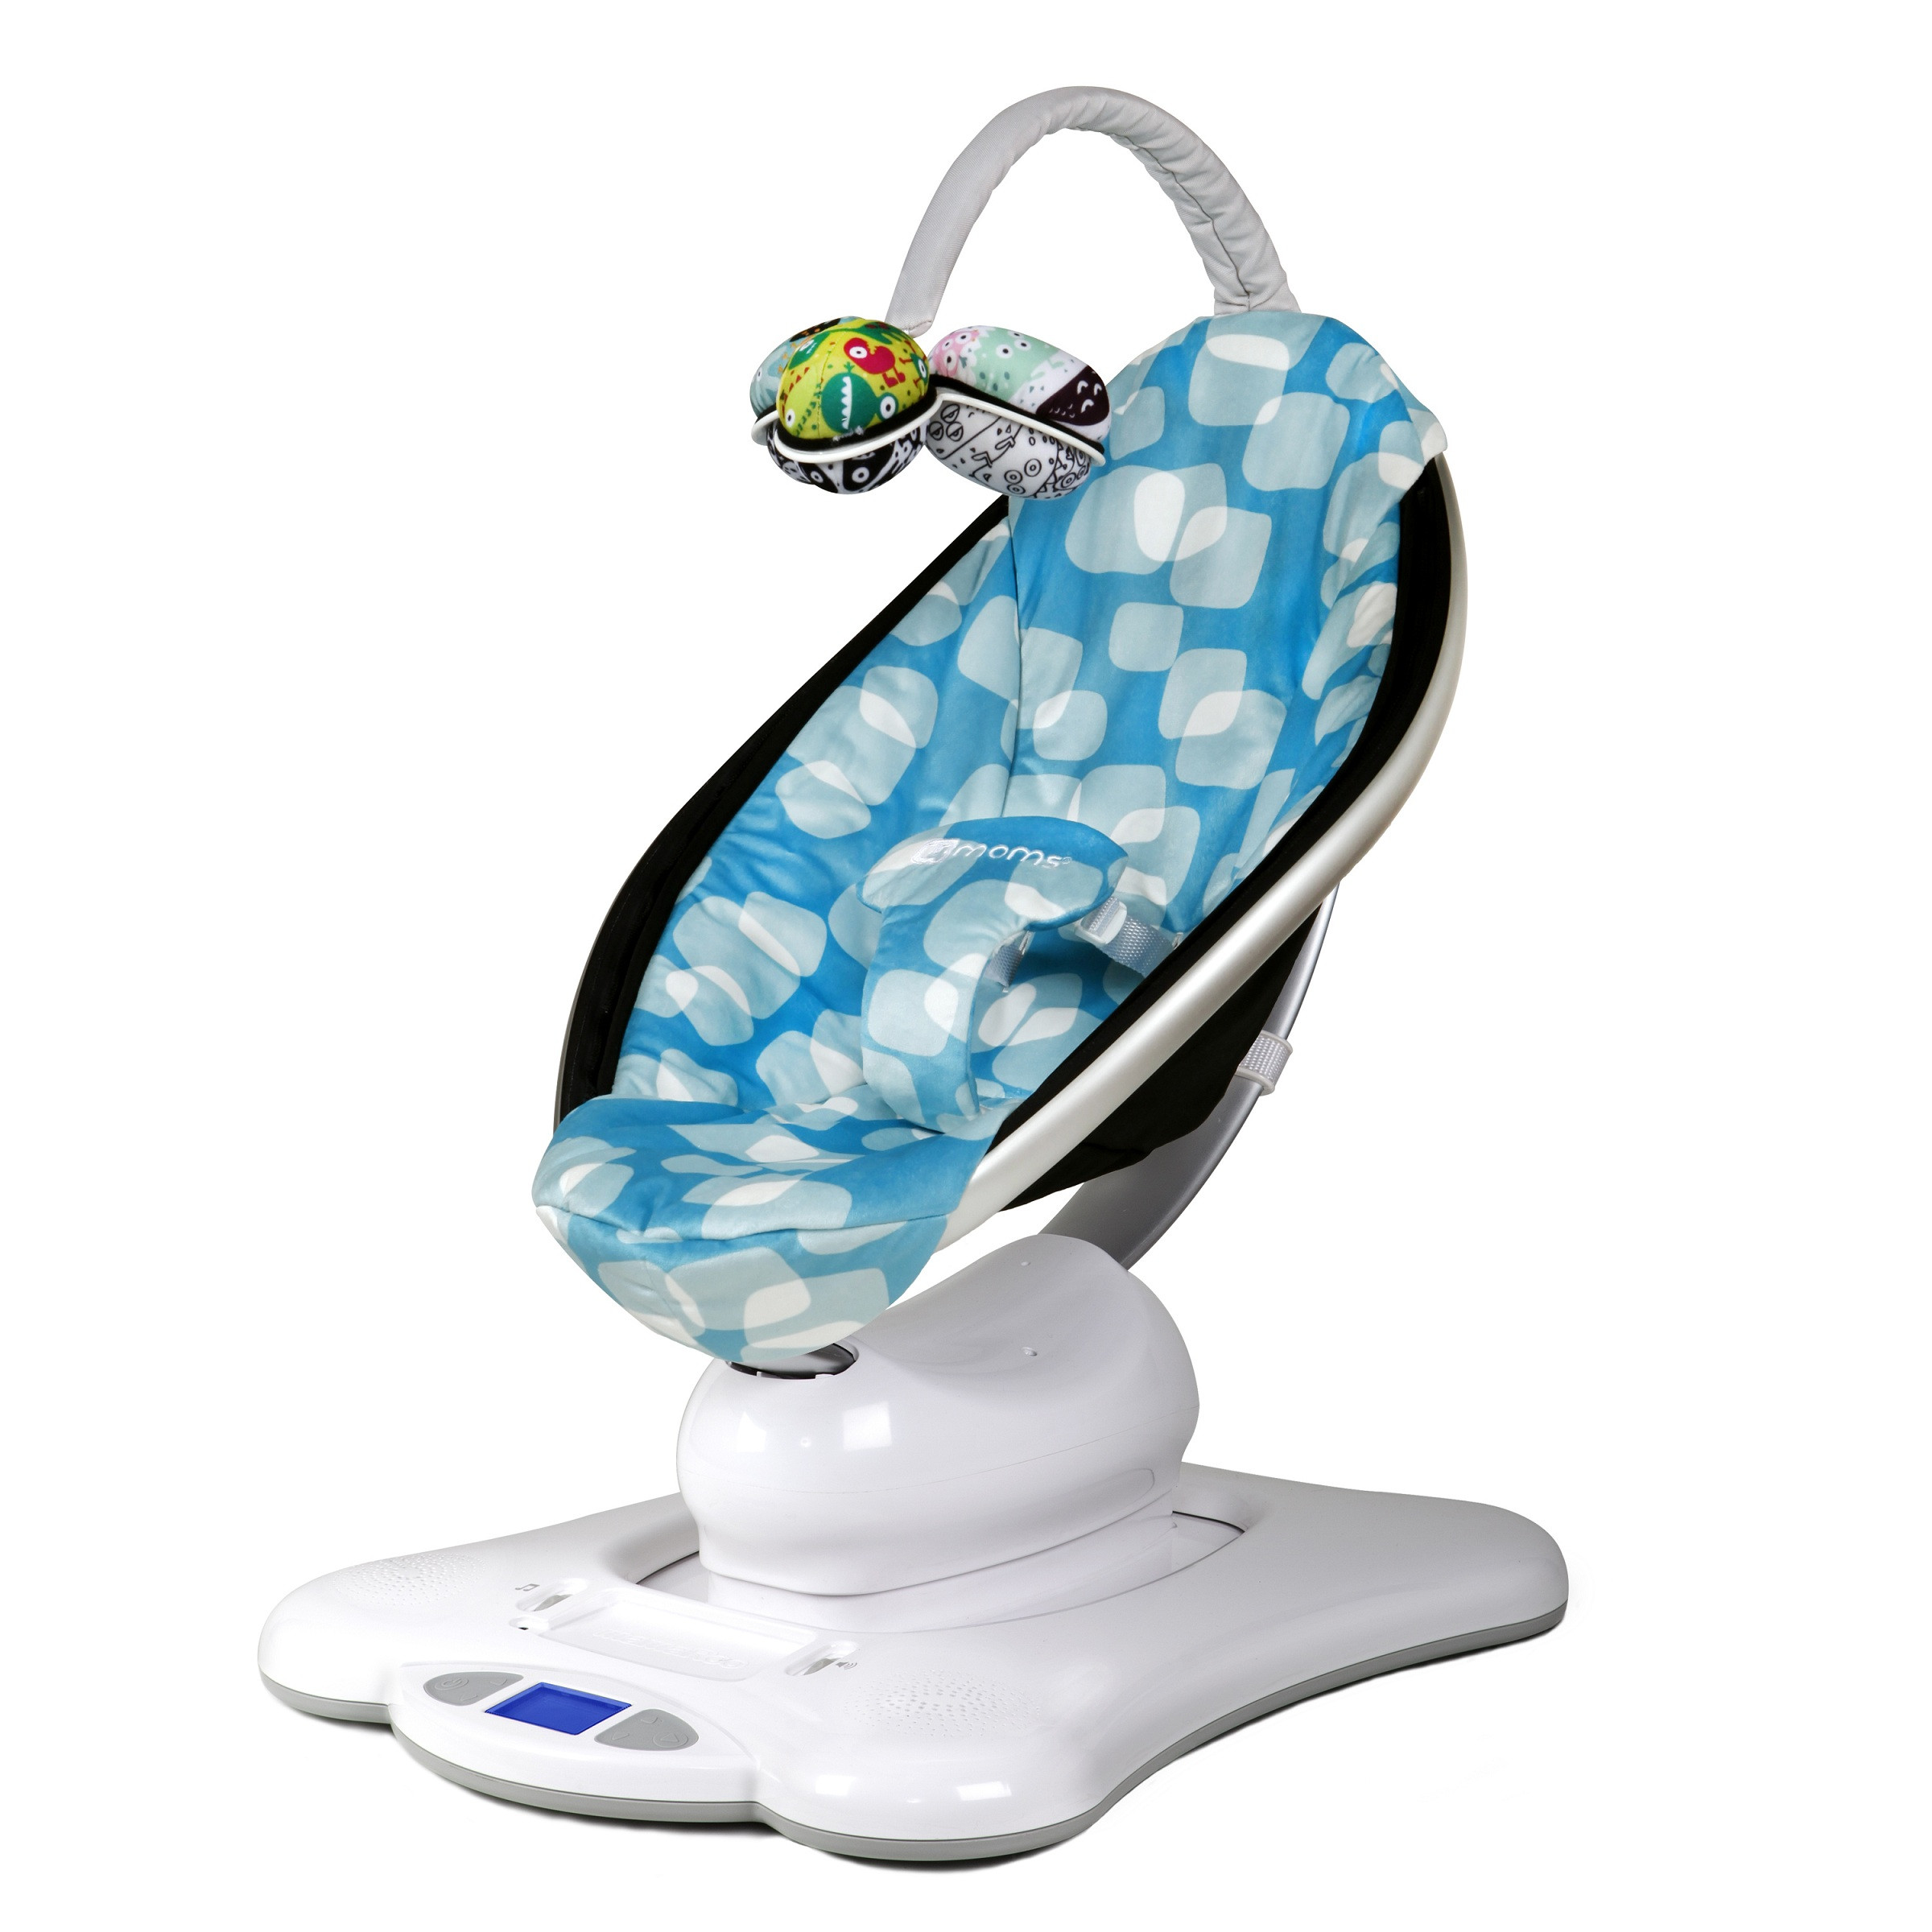 Best ideas about Mamaroo Baby Swing
. Save or Pin 4moms mamaRoo Swing Now.